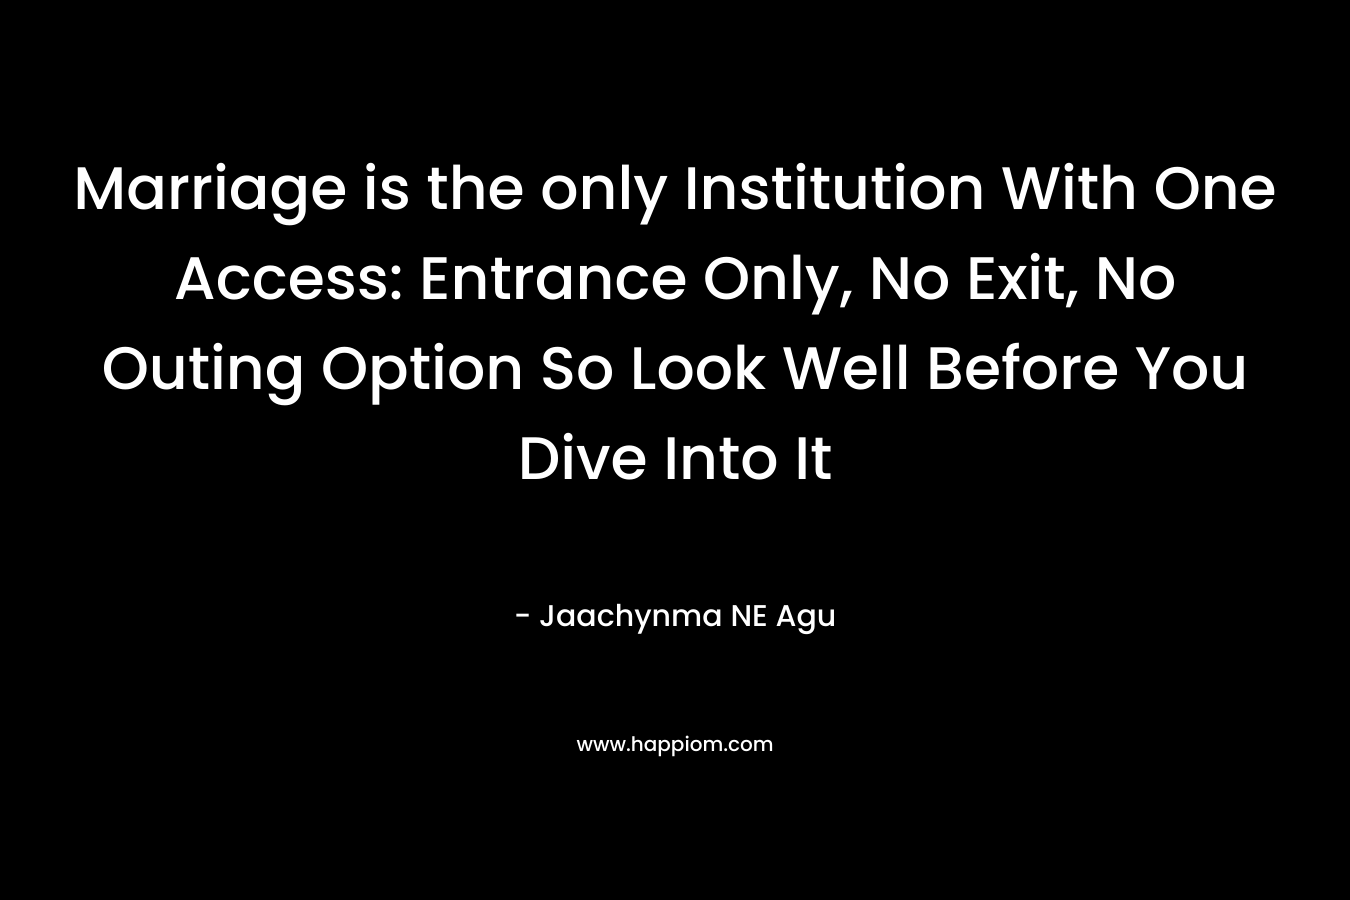 Marriage is the only Institution With One Access: Entrance Only, No Exit, No Outing Option So Look Well Before You Dive Into It